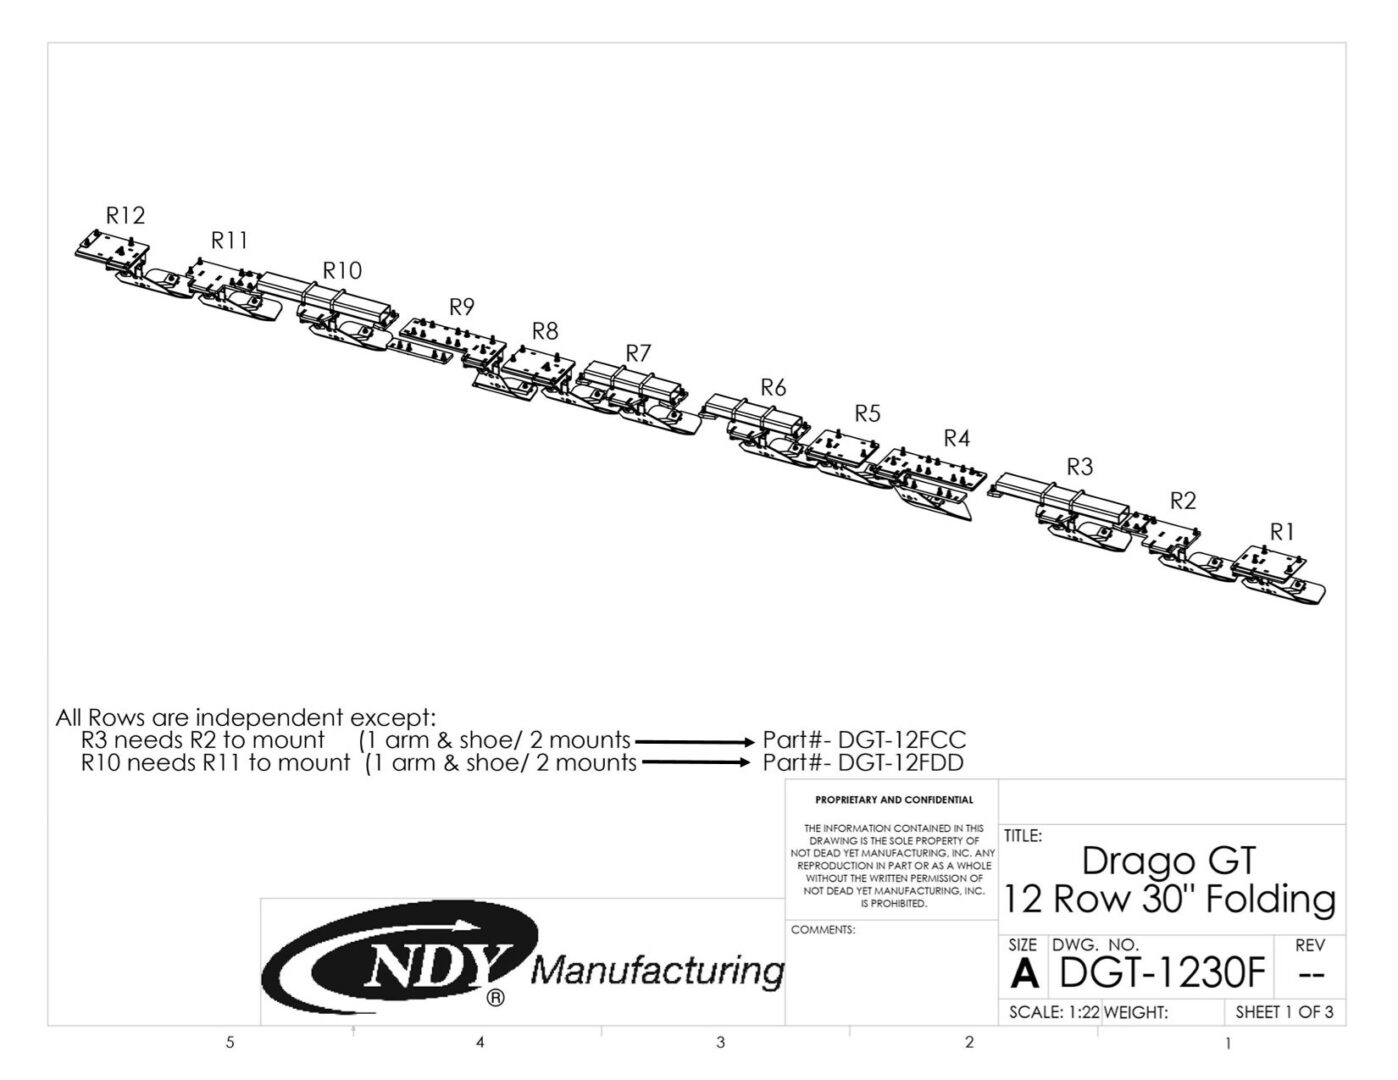 A diagram showing the parts of a Stalk Stomper for Drago GT Series 12 Row Folding Corn Head machine.